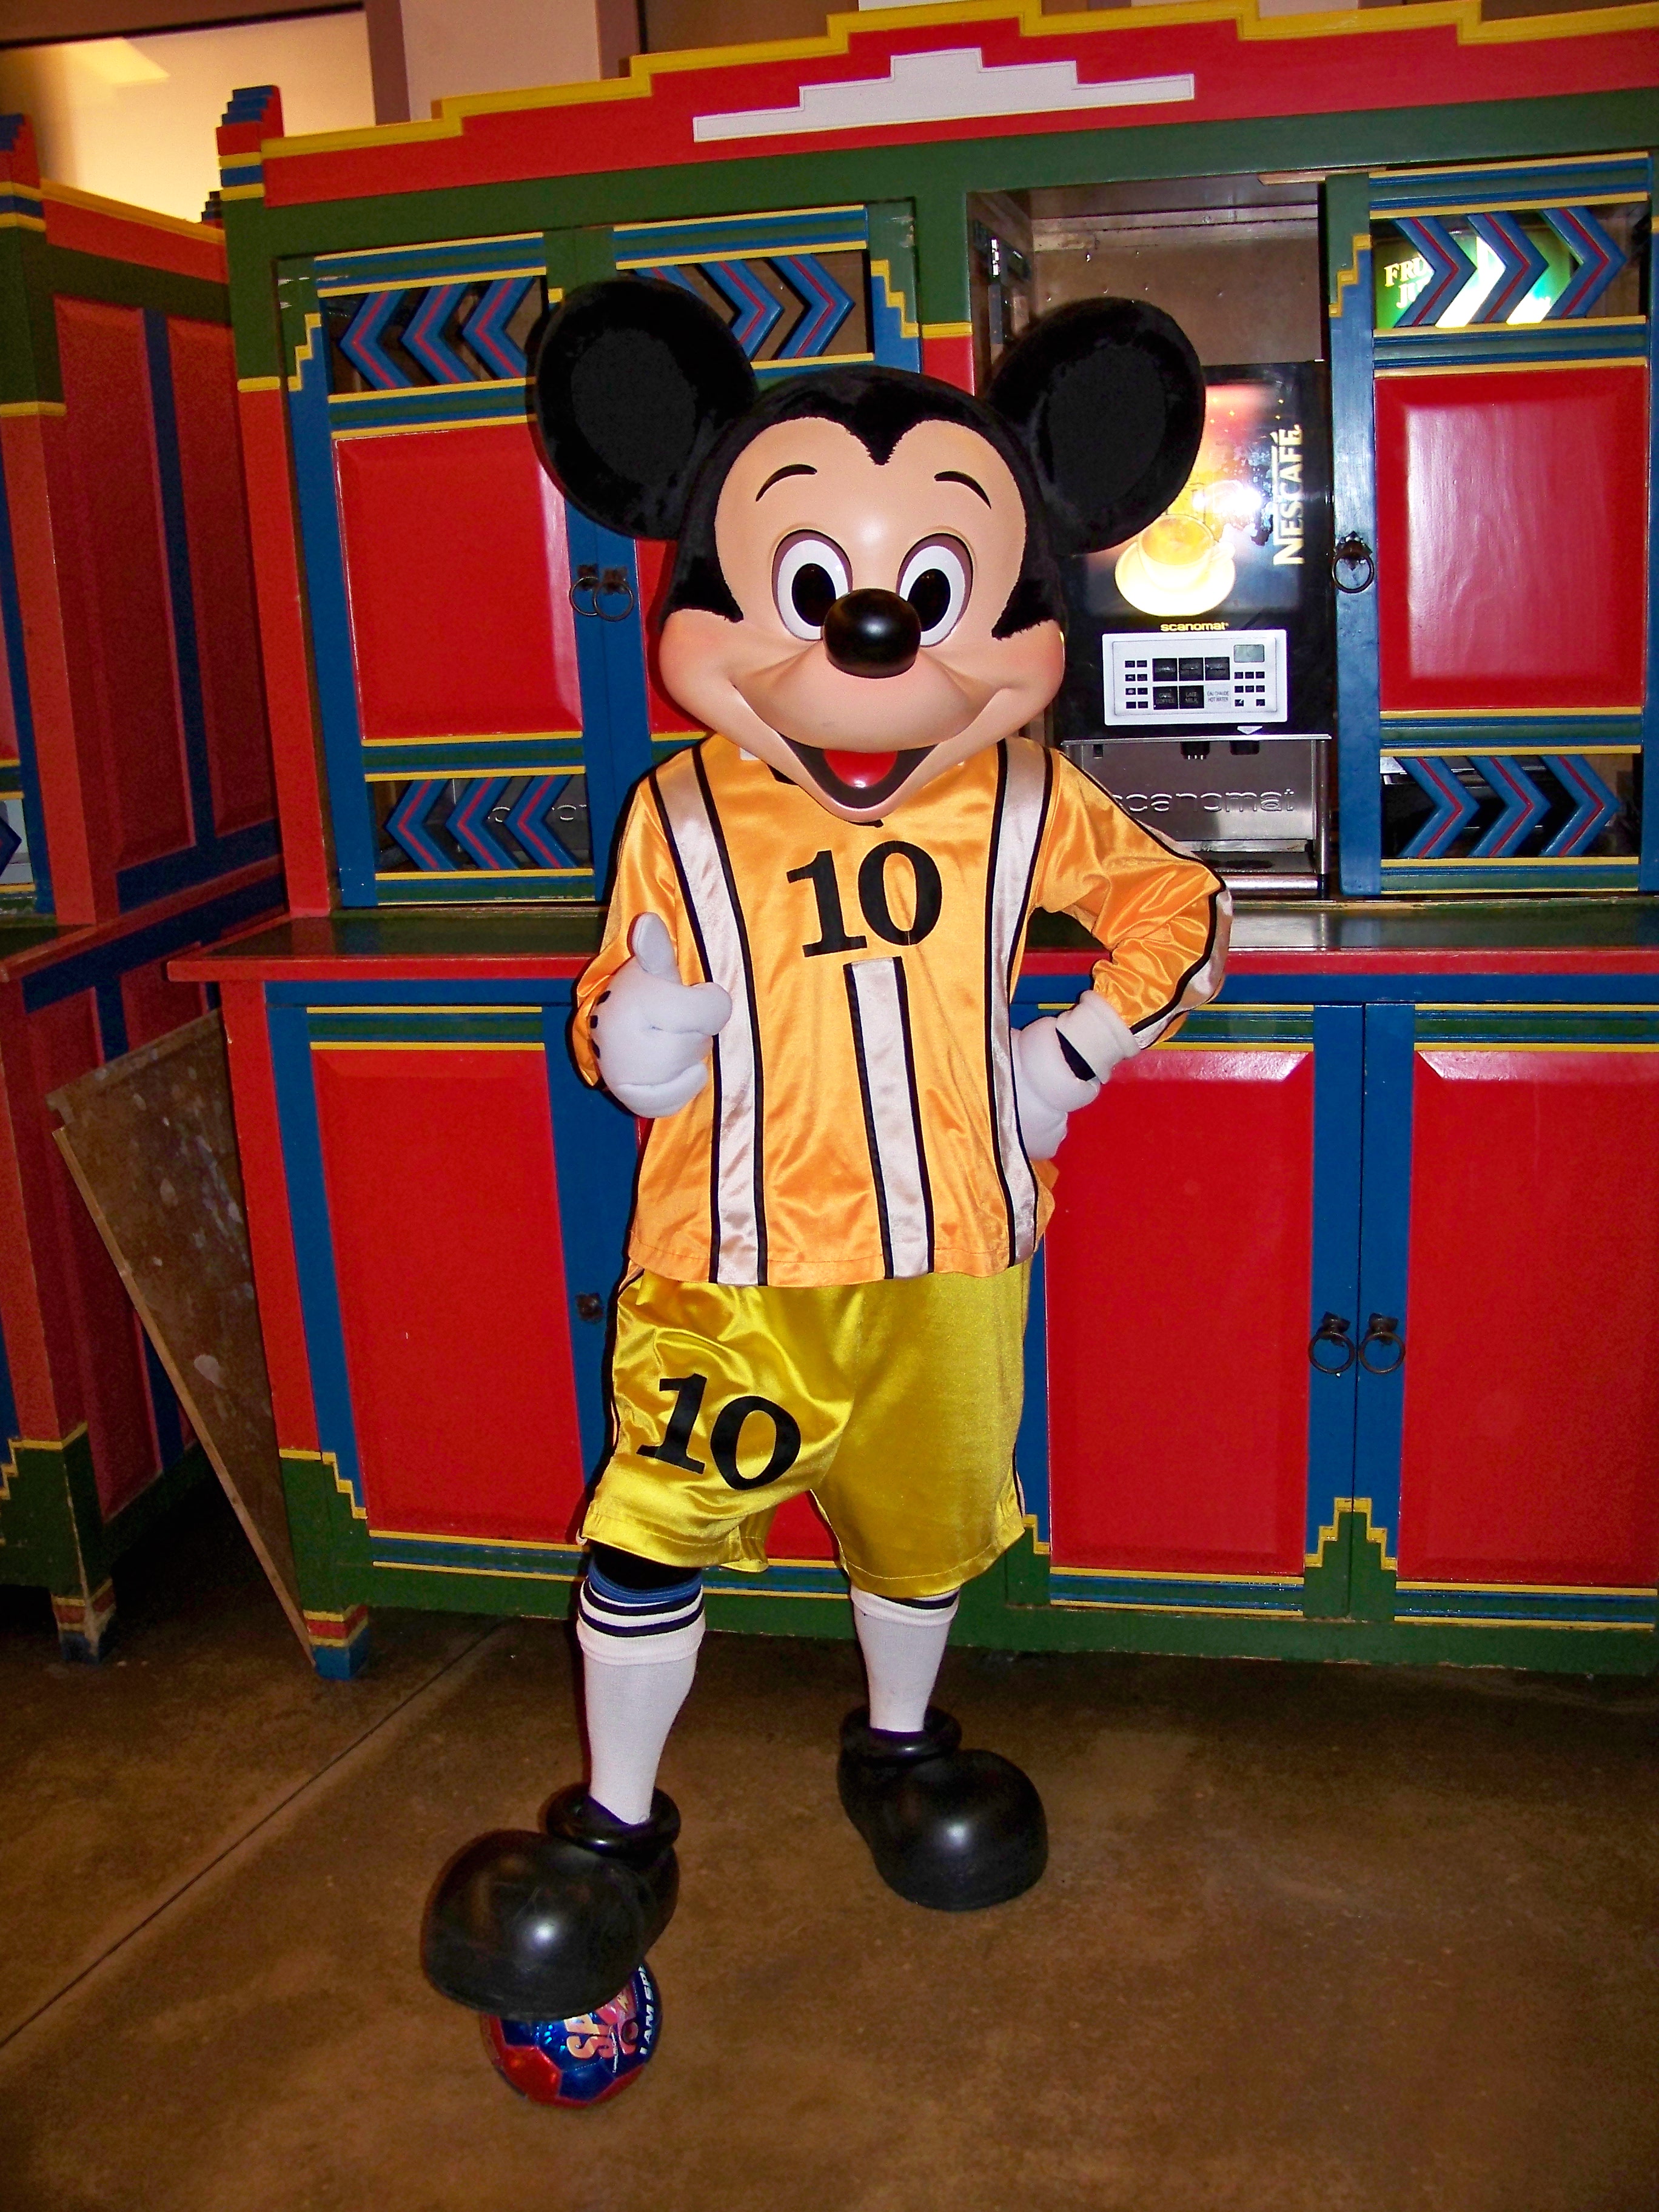 During the European Soccer Championship 2008 Mickey visited guests at the Disney's Santa Fe Hotel wearing a soccer outfit.